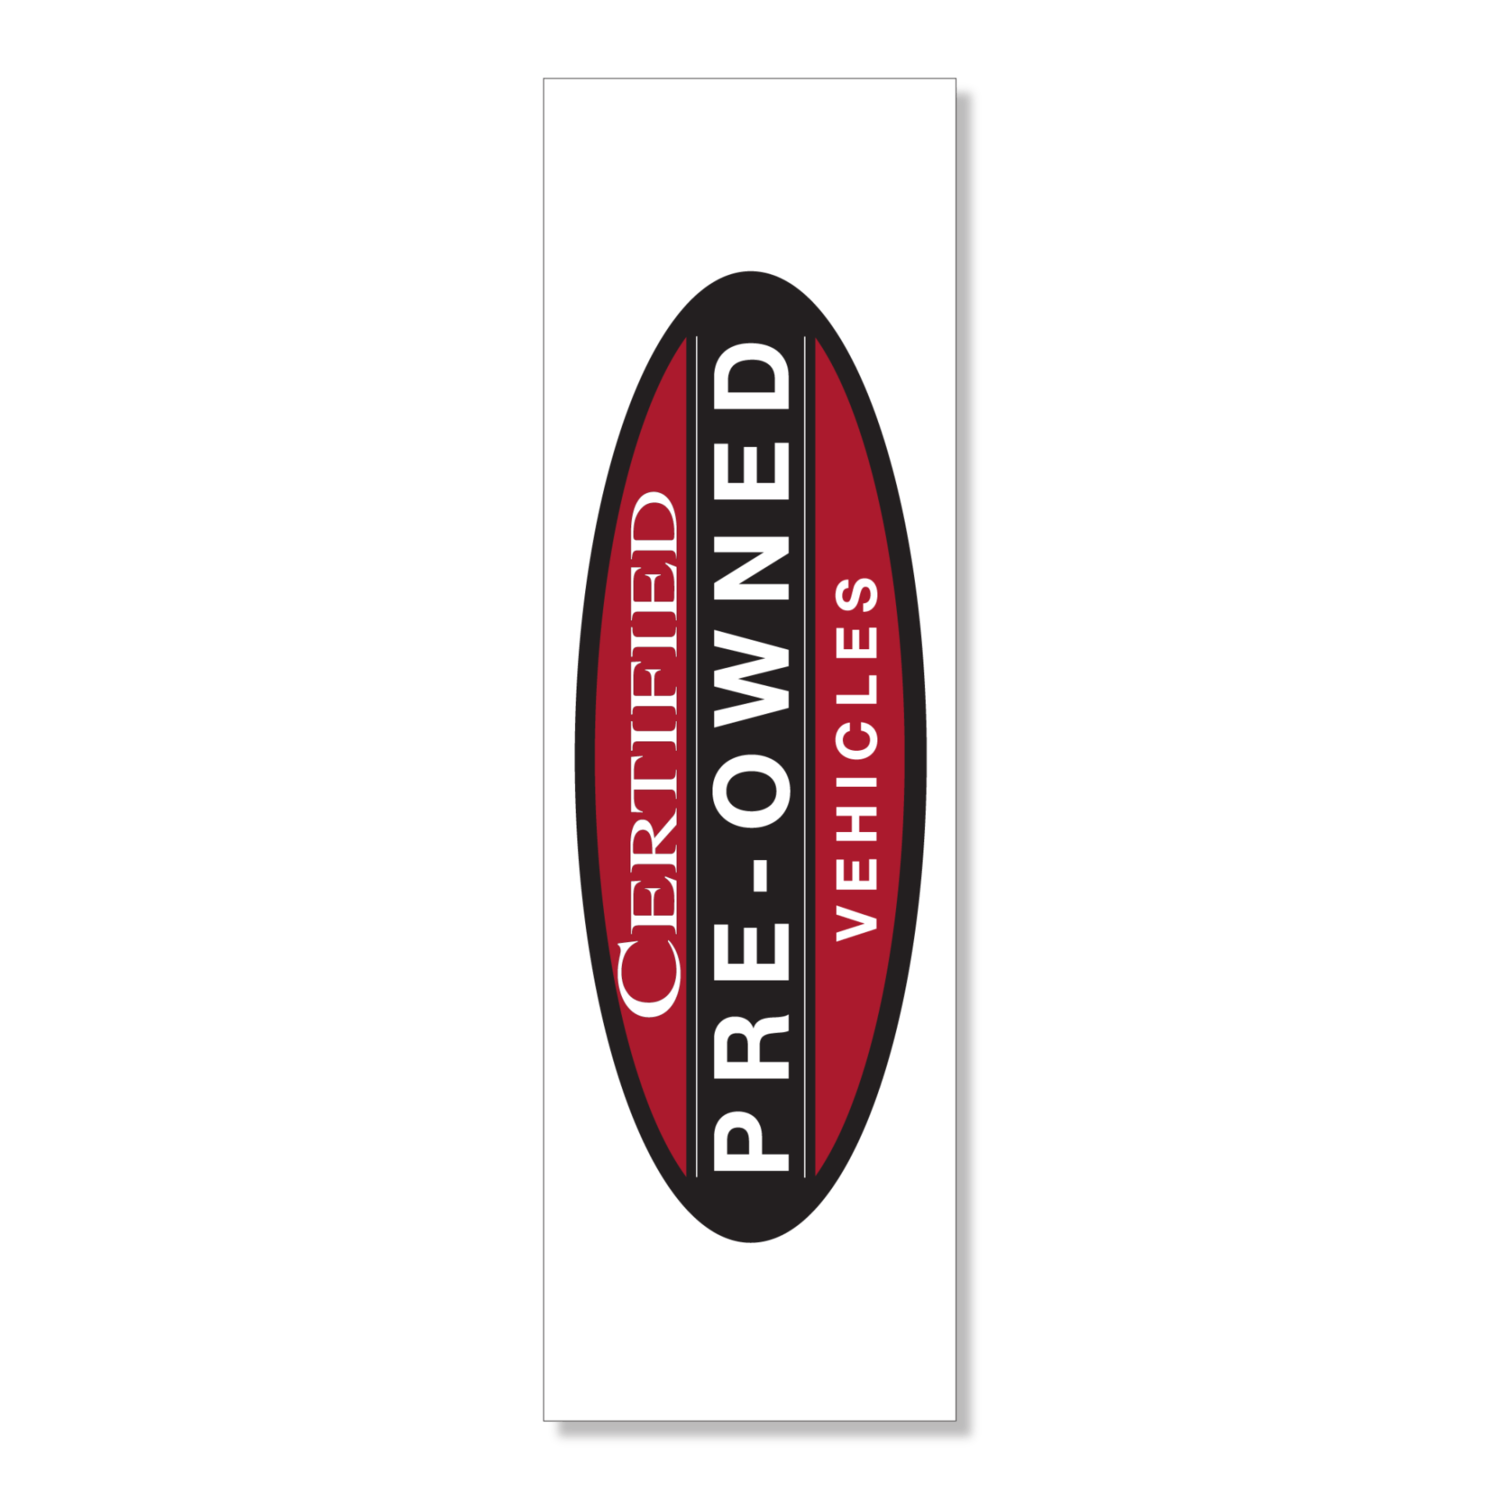 Certified Pre-Owned Vehicles 55/56